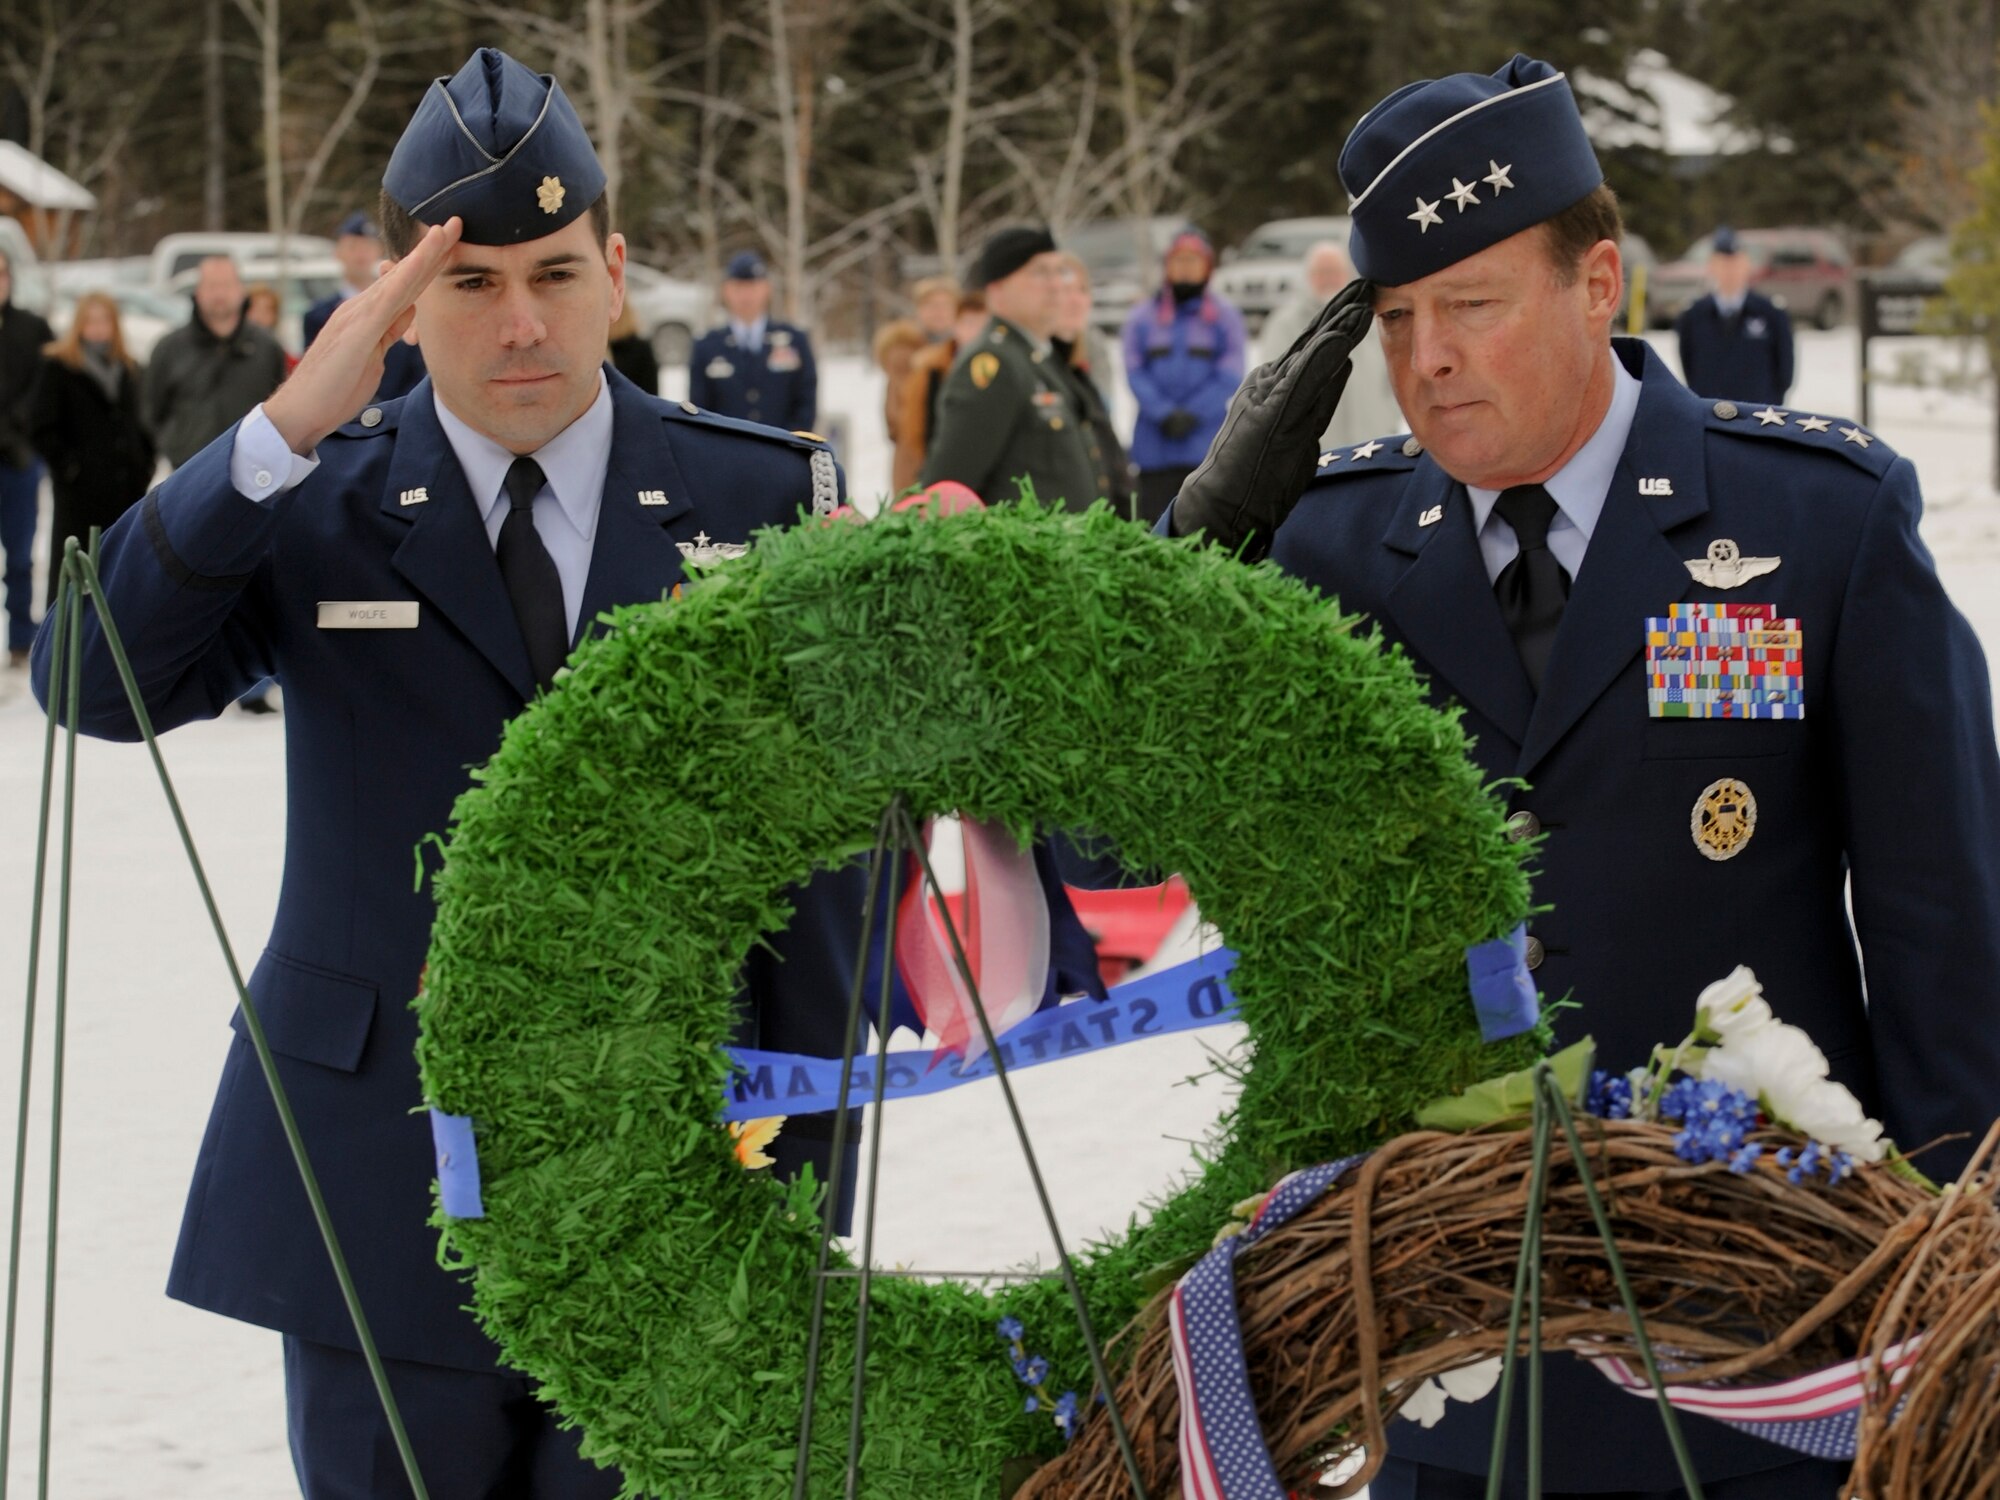 FORT RICHARDSON, Alaska -- Maj. Thomas Wolfe (left) and Lt. Gen. Dana Atkins (right), 11th Air Force commander, salute a wreath during the Veterans Day ceremony at Fort Richardson National Cemetery Nov. 11. The ceremony commemorated all those who paid the ultimate sacrifice for their country. Air Force alongside Army and Canadian forces were present for the ceremony. (U.S. Air Force photo/Staff Sgt. Joshua Garcia)